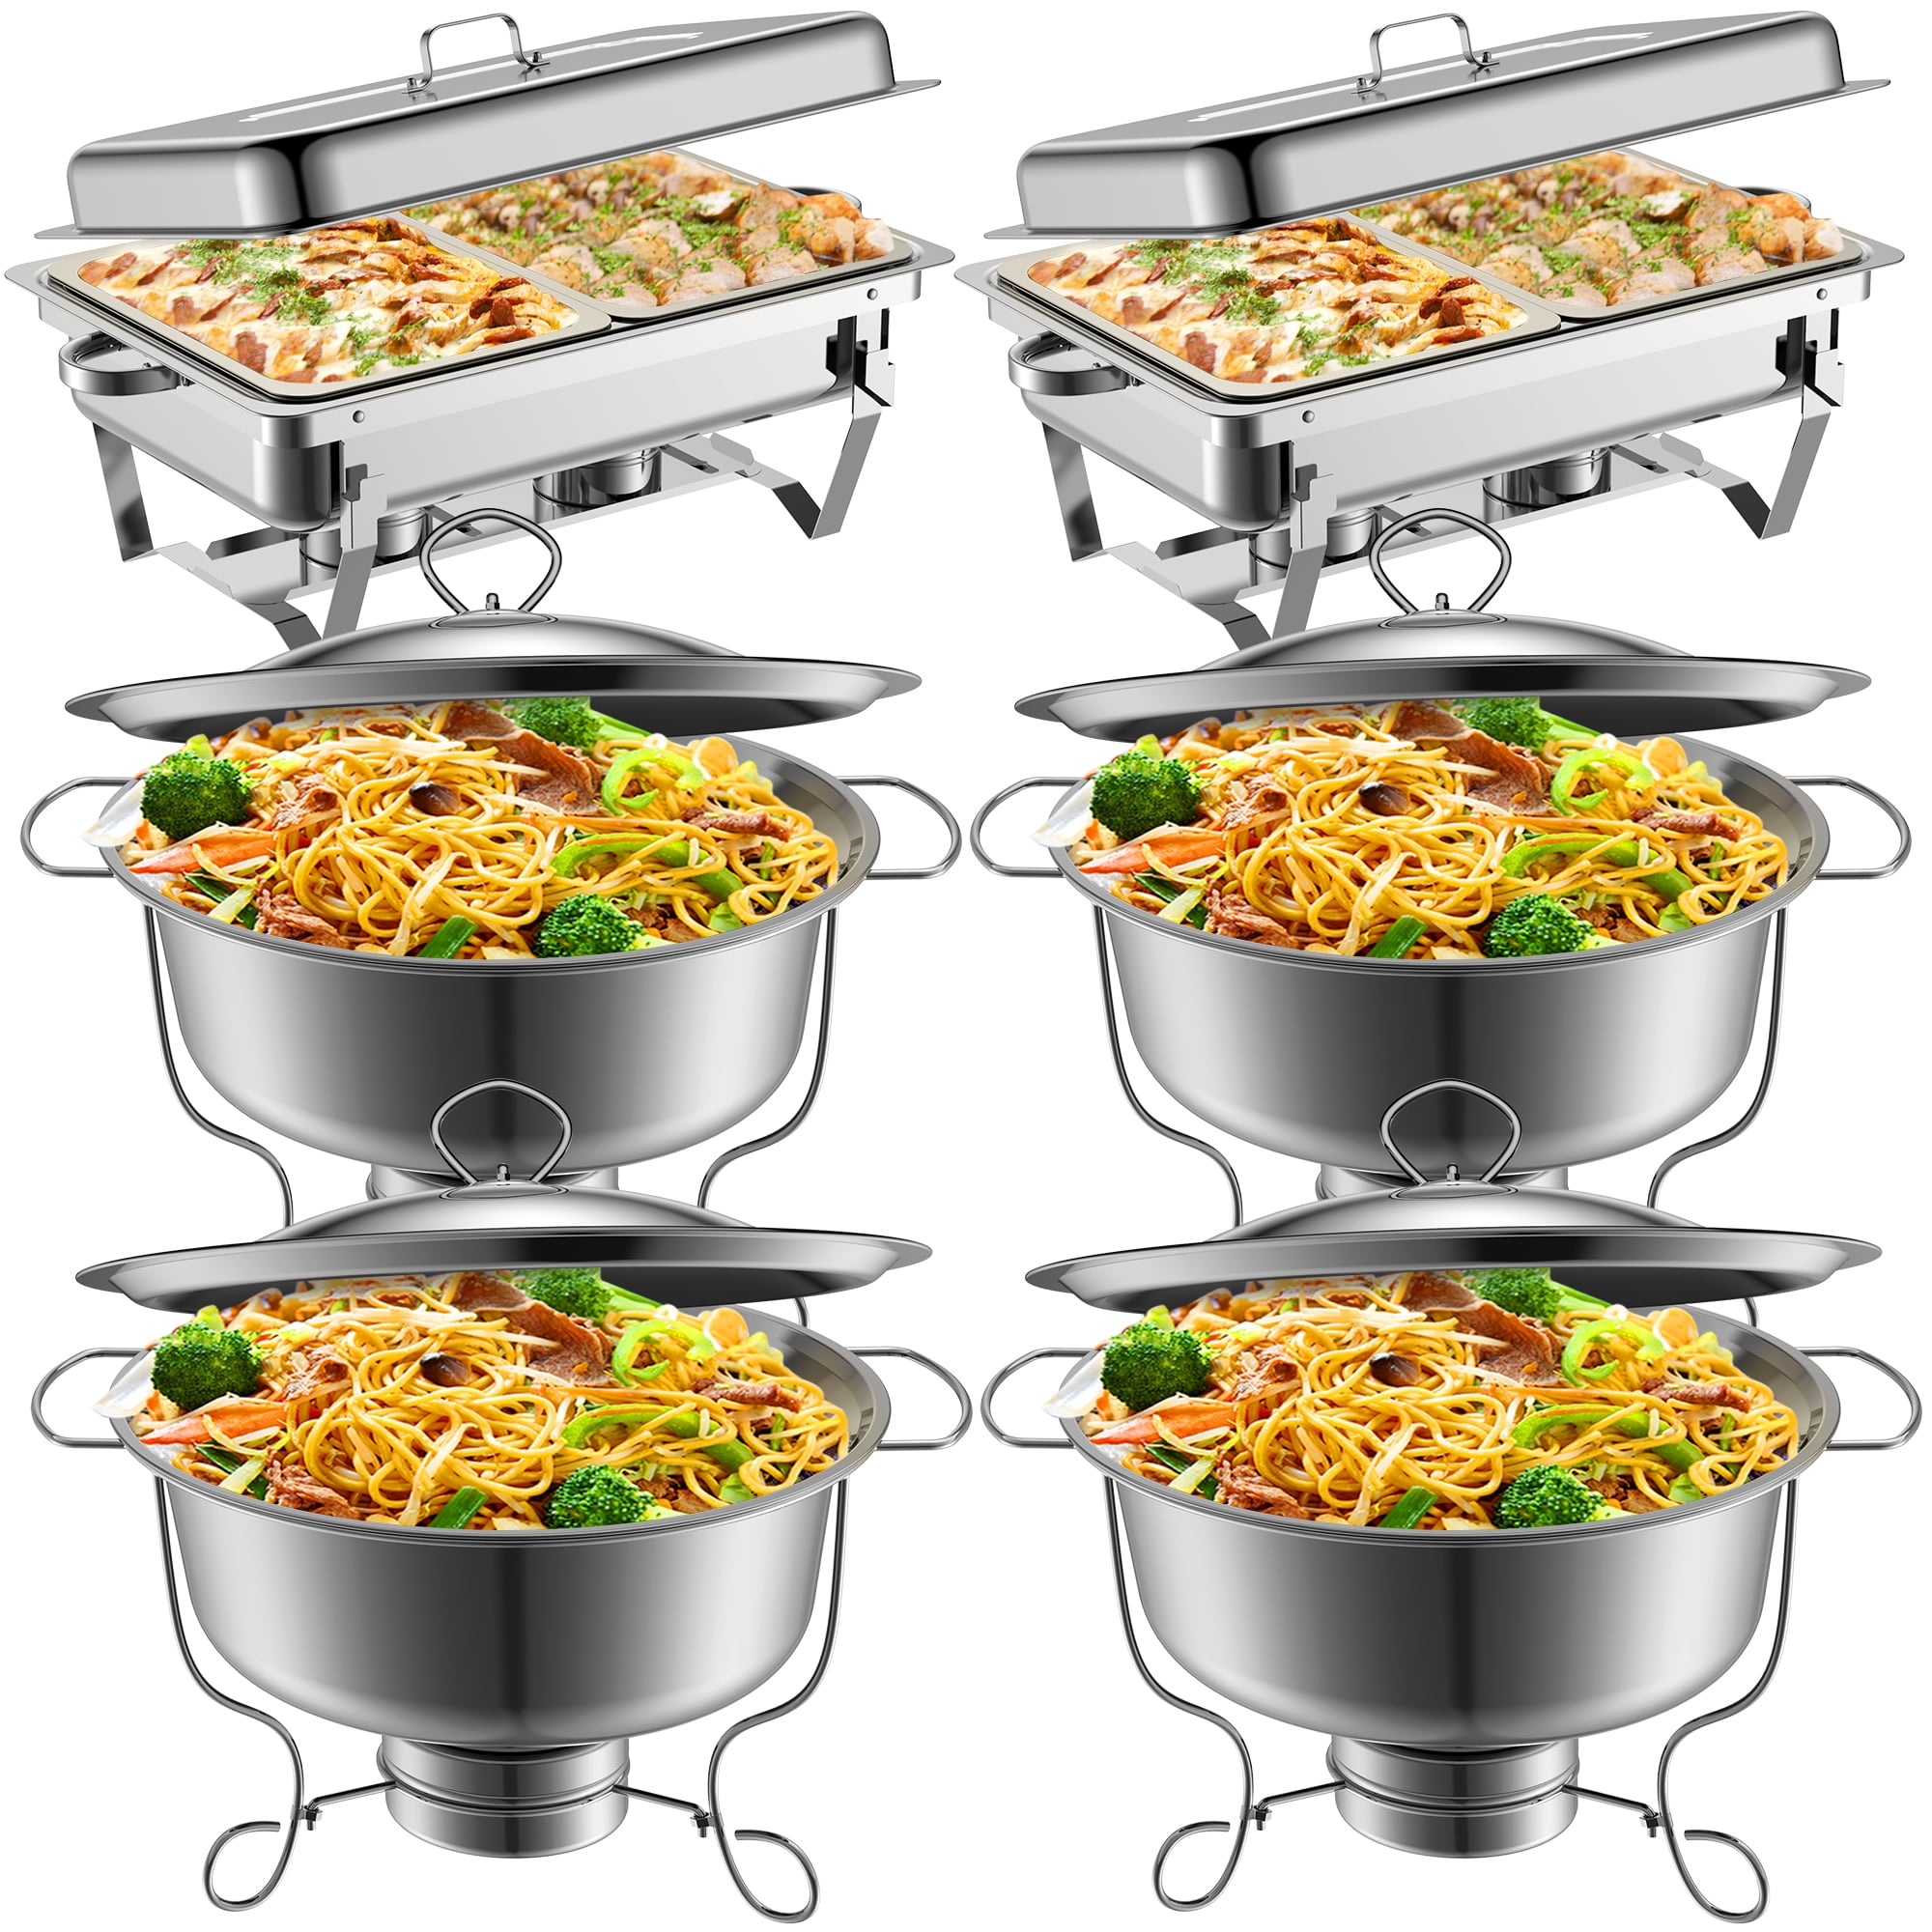 Details about   Chafing Dish Stainless Steel Tray Buffet Catering Chafers 2 Pack 8 Quart&5 Quart 